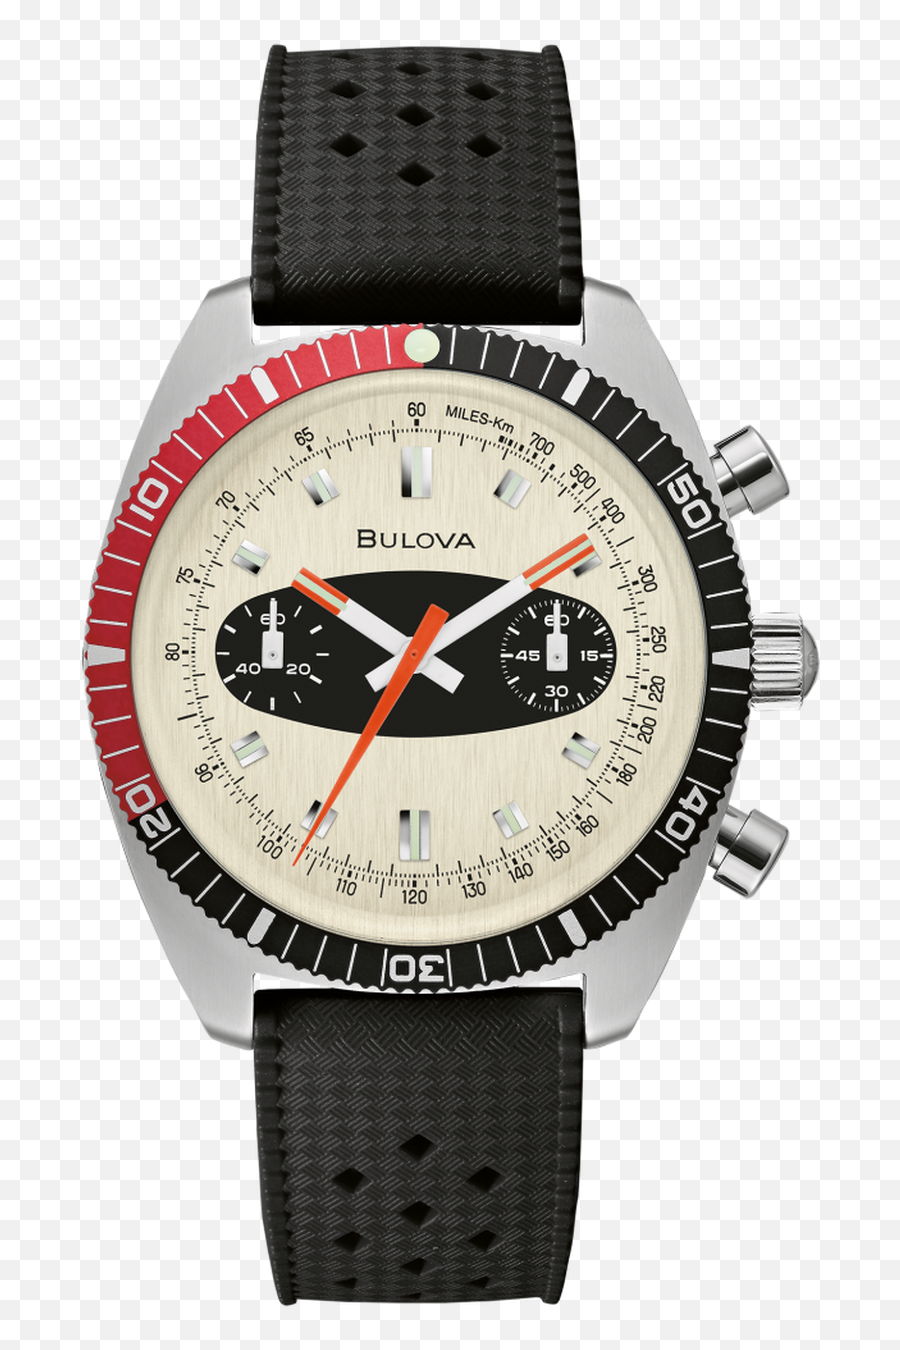 Details About New Bulova Surfboard Chronograph A Ivory Dial Rubber Band Menu0027s Watch 98a252 - Bulova 98a252 Png,Rubber Band Png